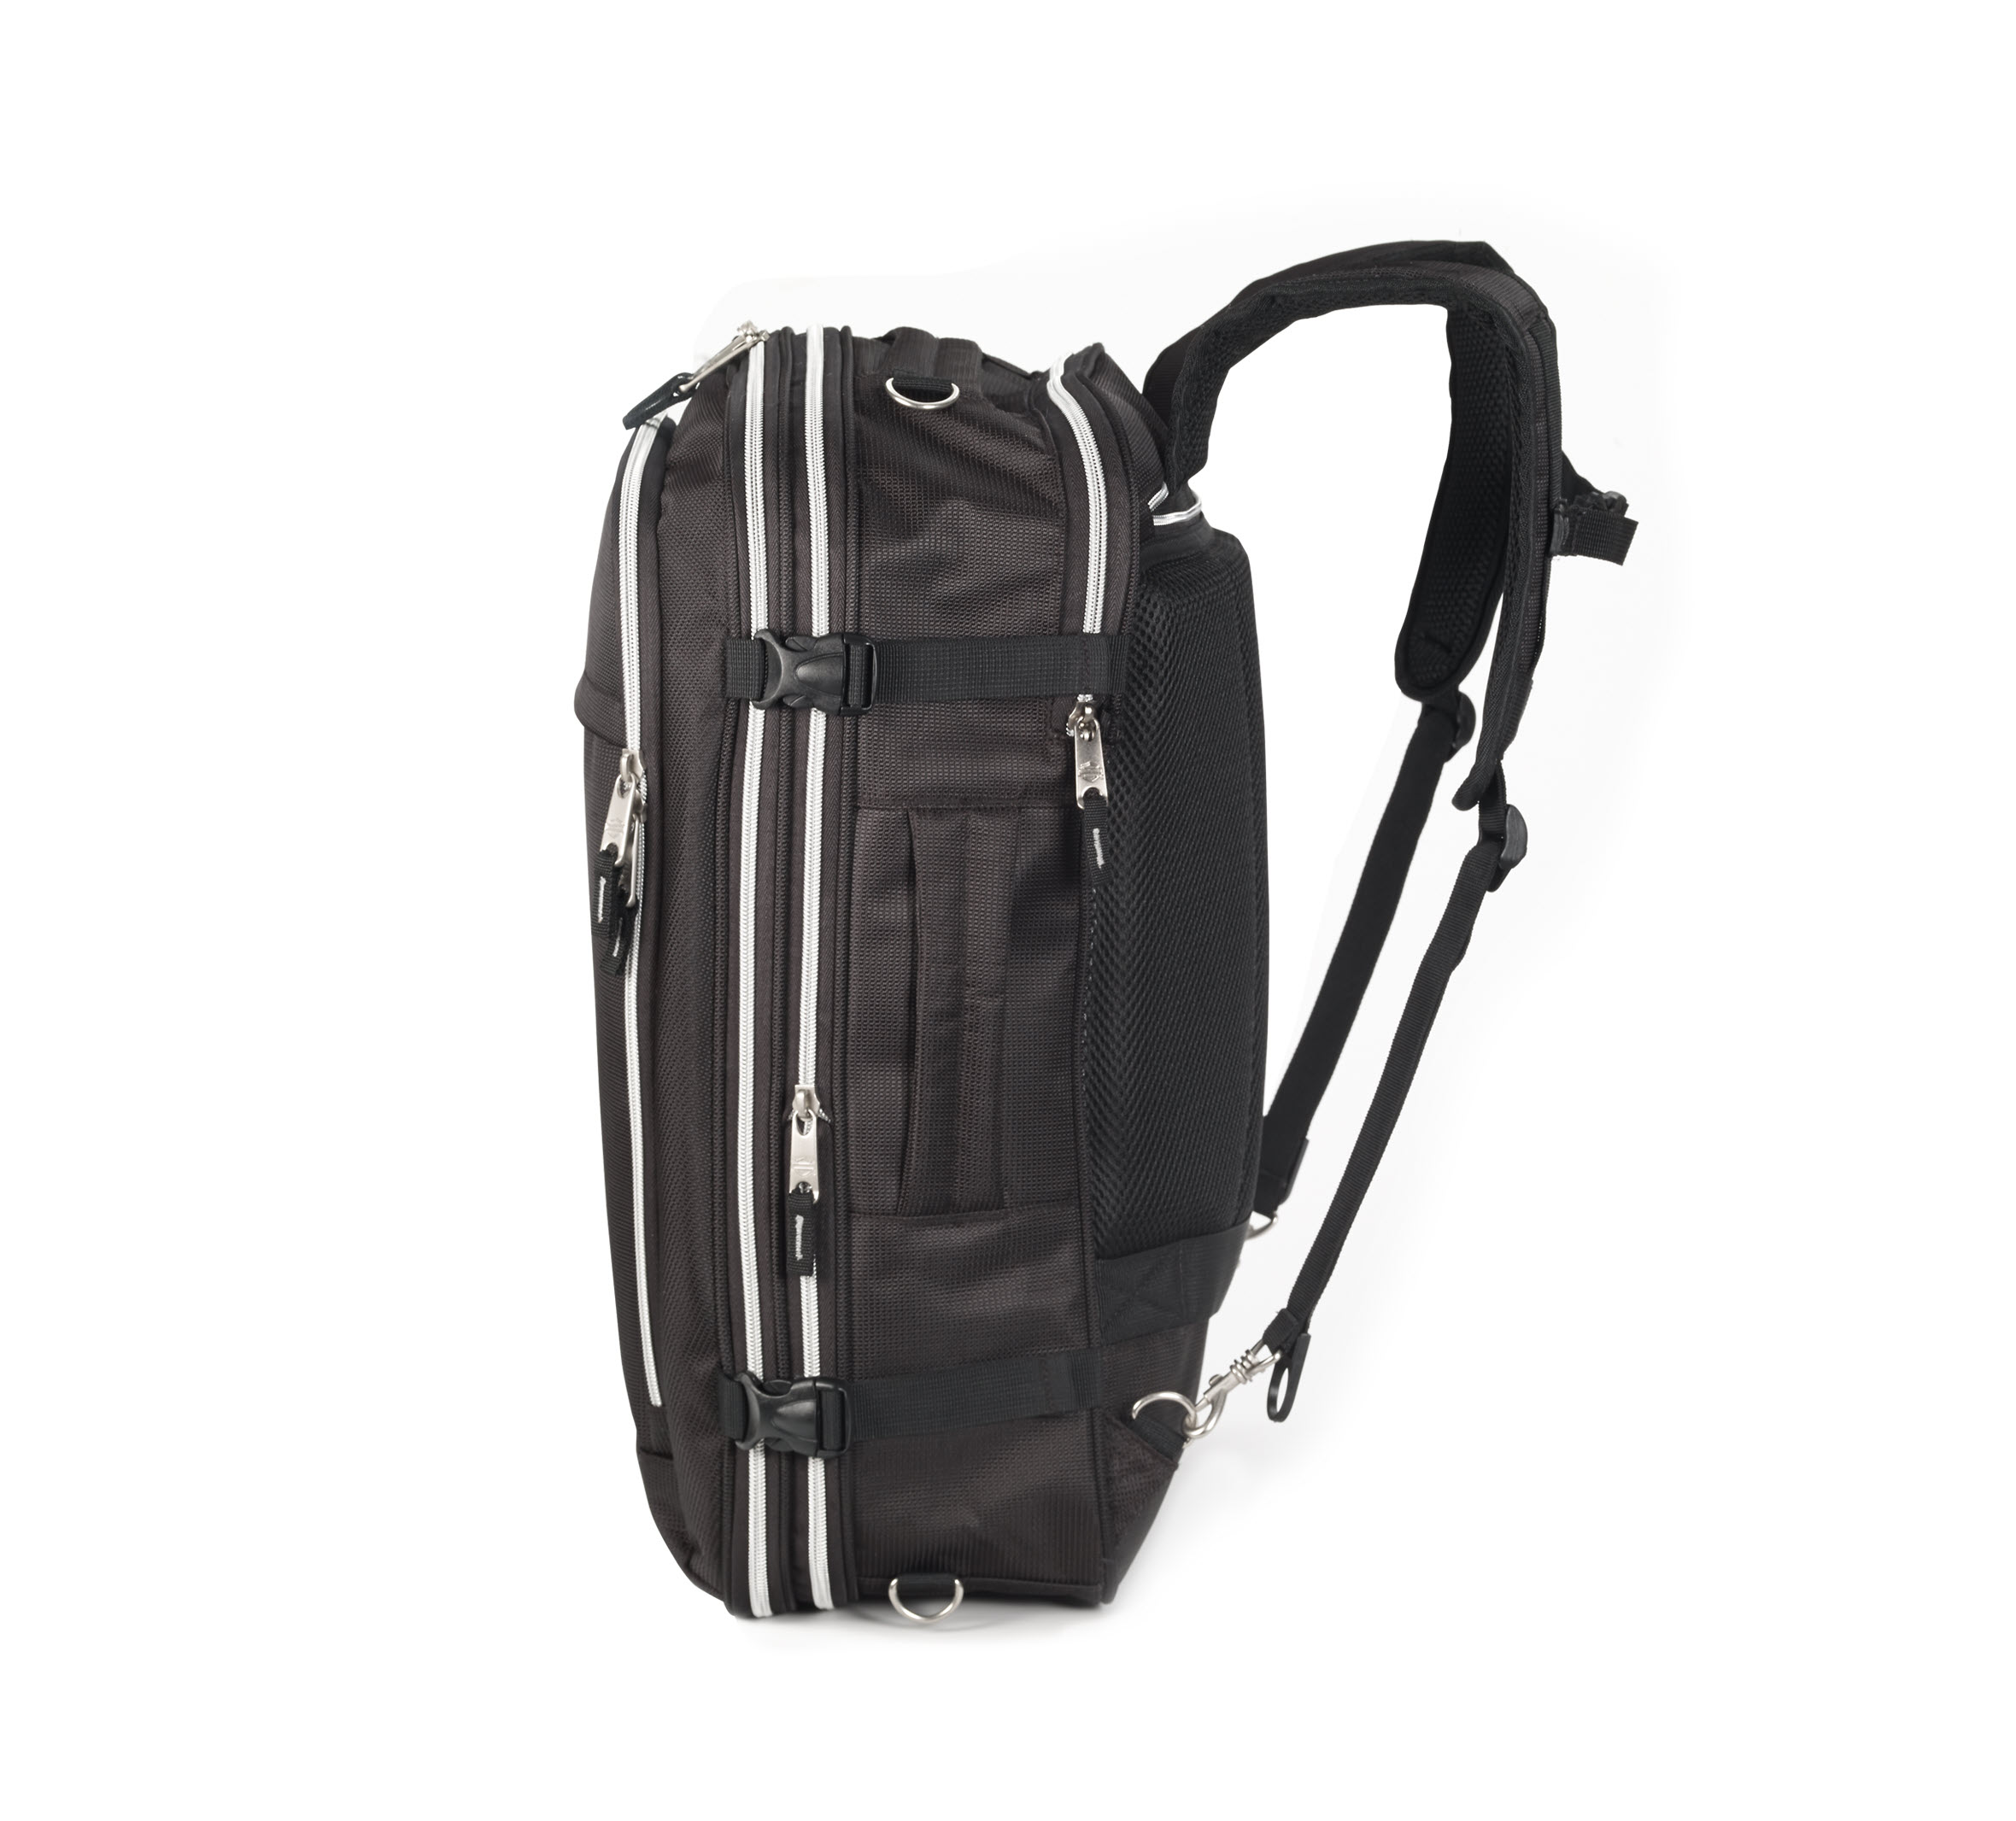 SILVERADO Carry-on Backpack with Hideaway Backpack straps | Harley 